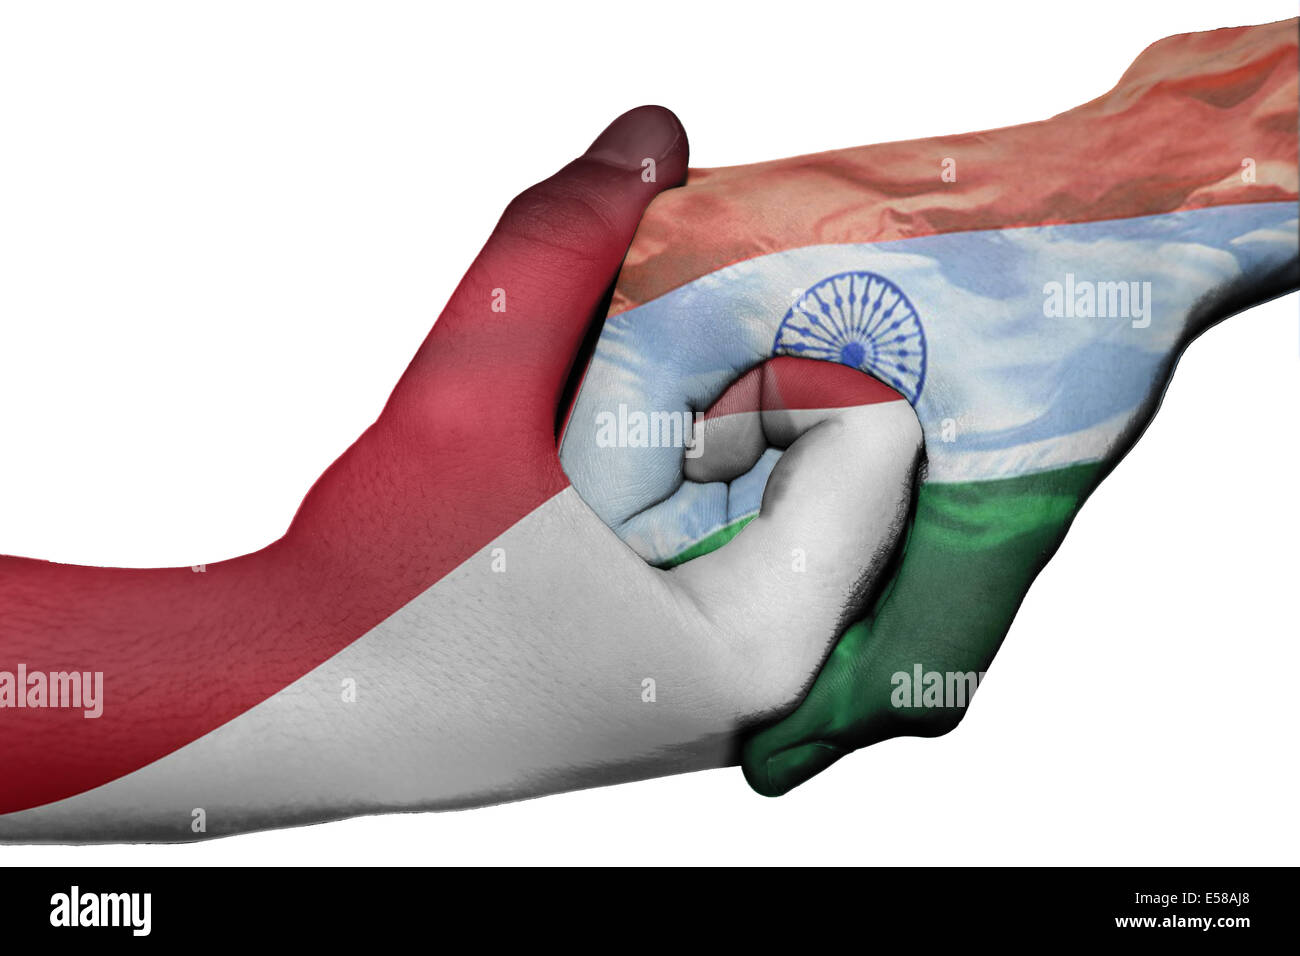 Diplomatic handshake between countries: flags of Indonesia and India overprinted the two hands Stock Photo